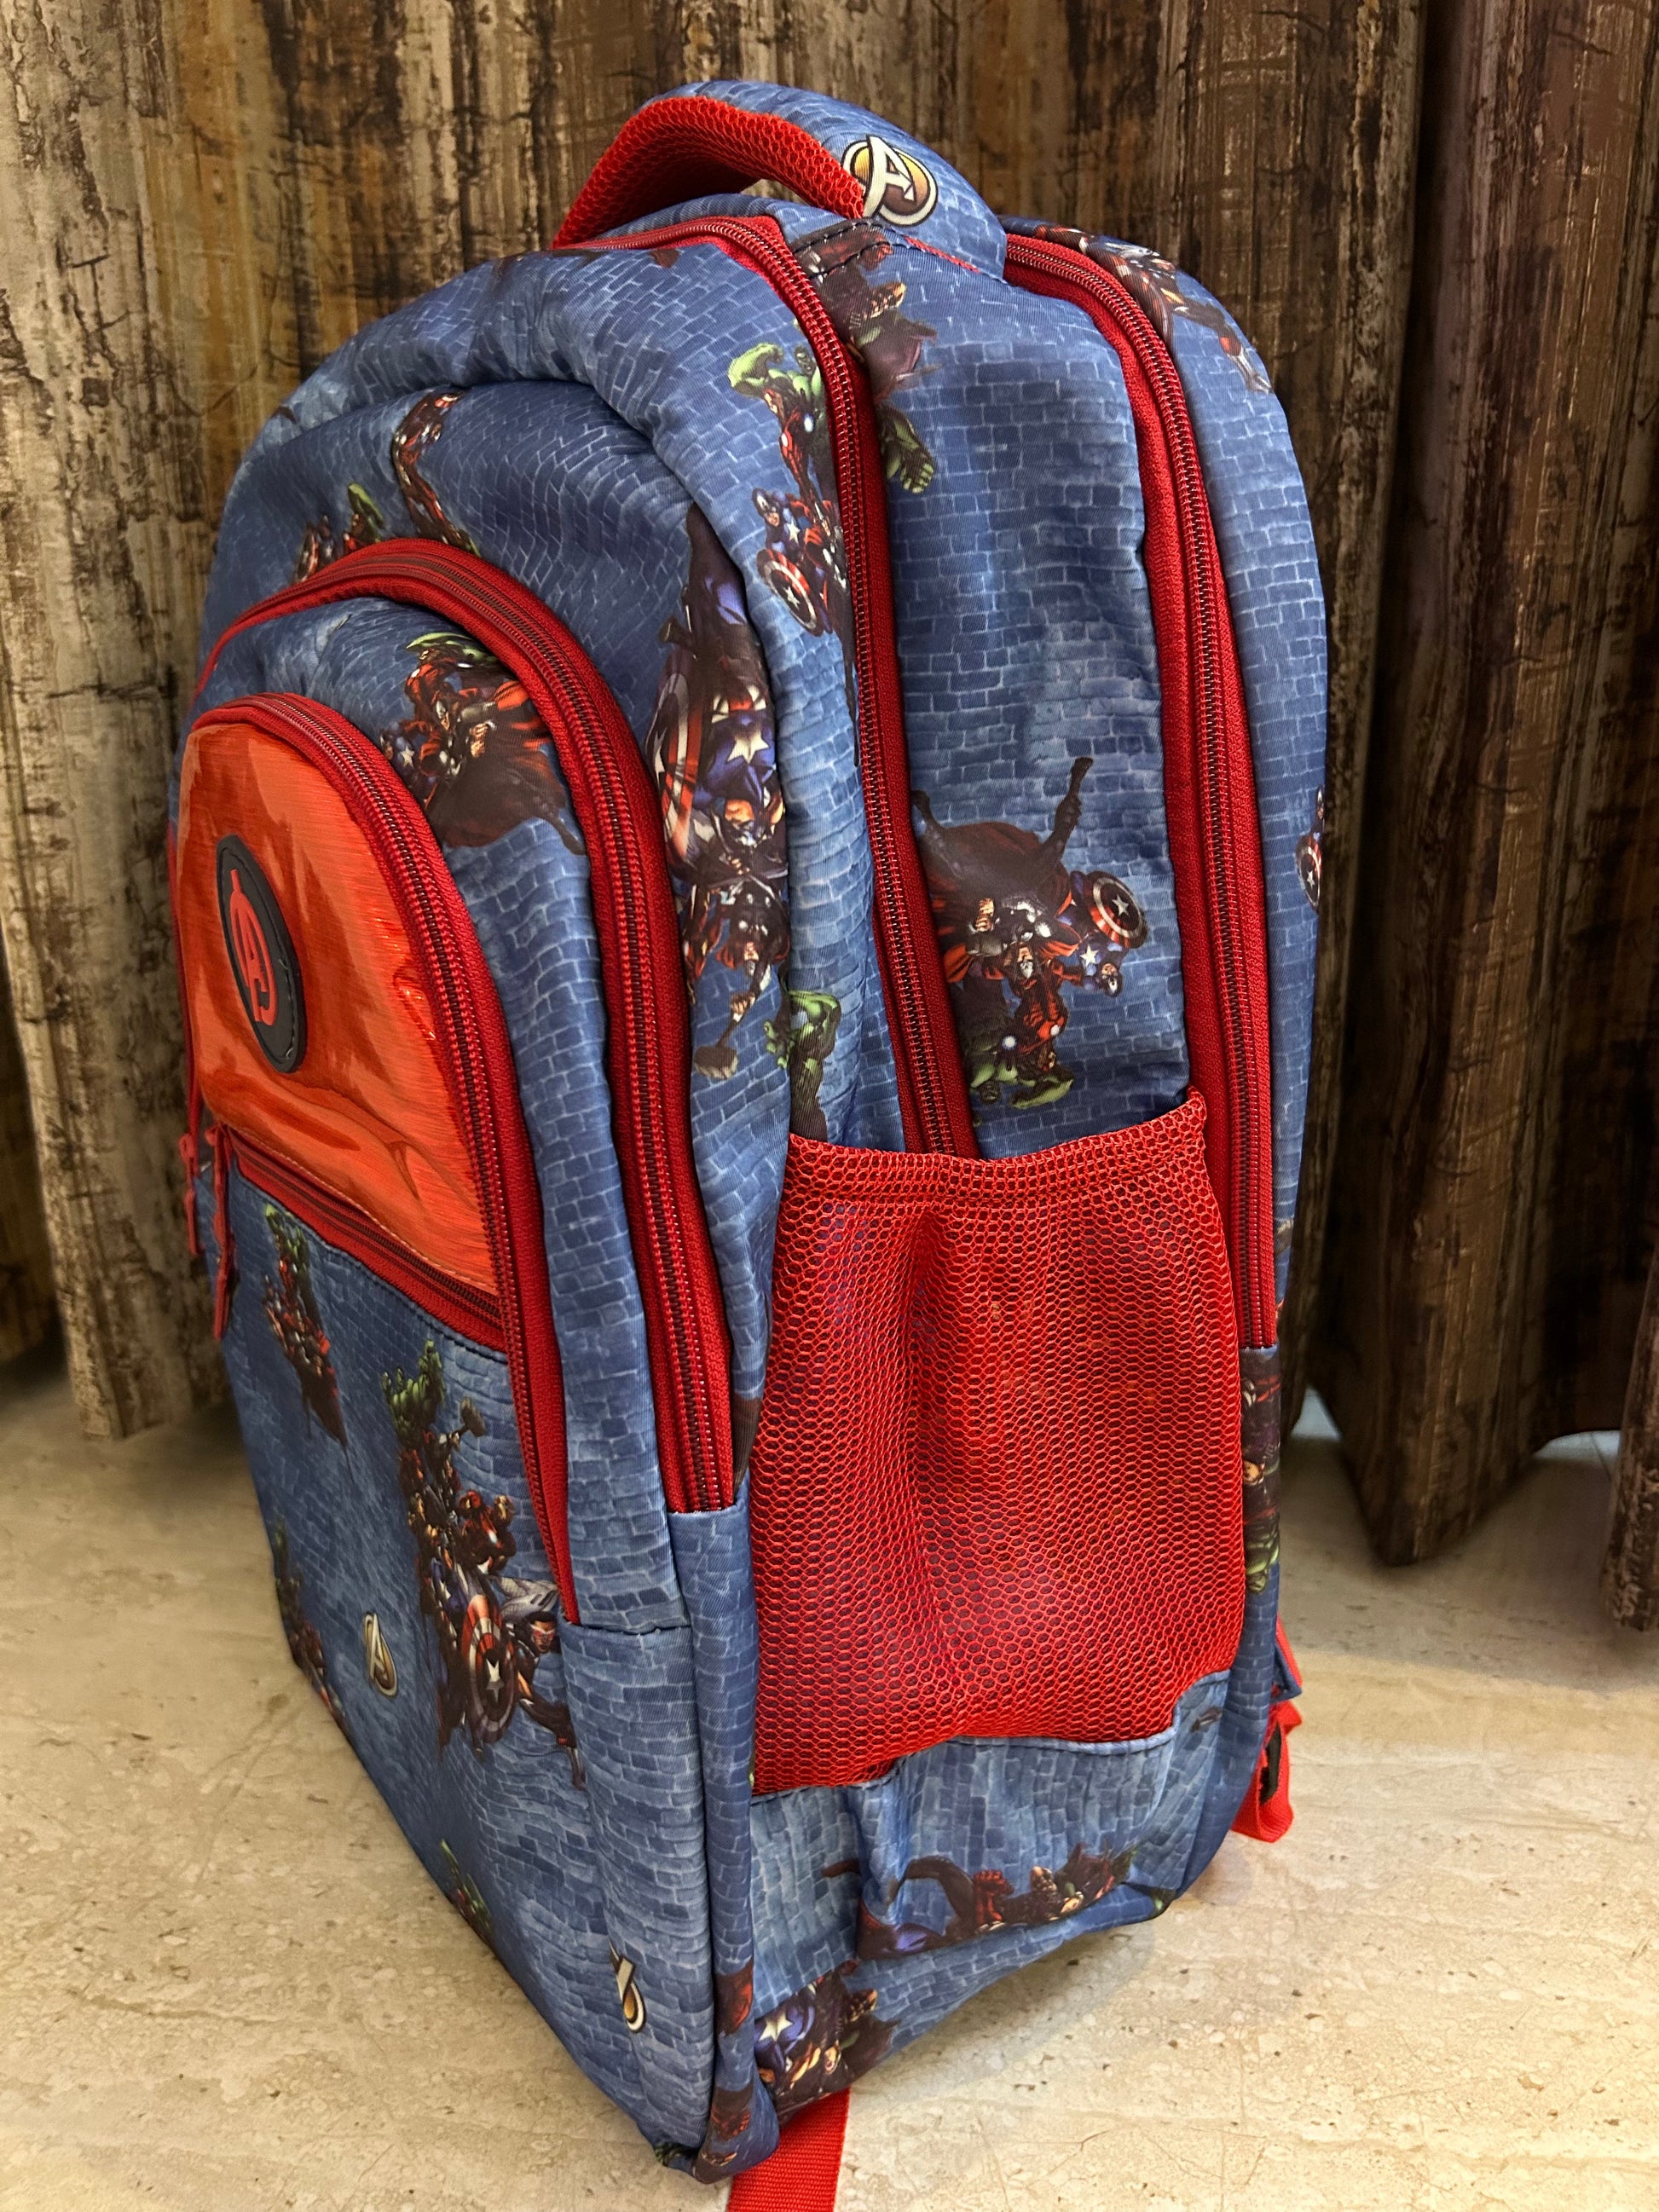 Avengers Holographic Backpack